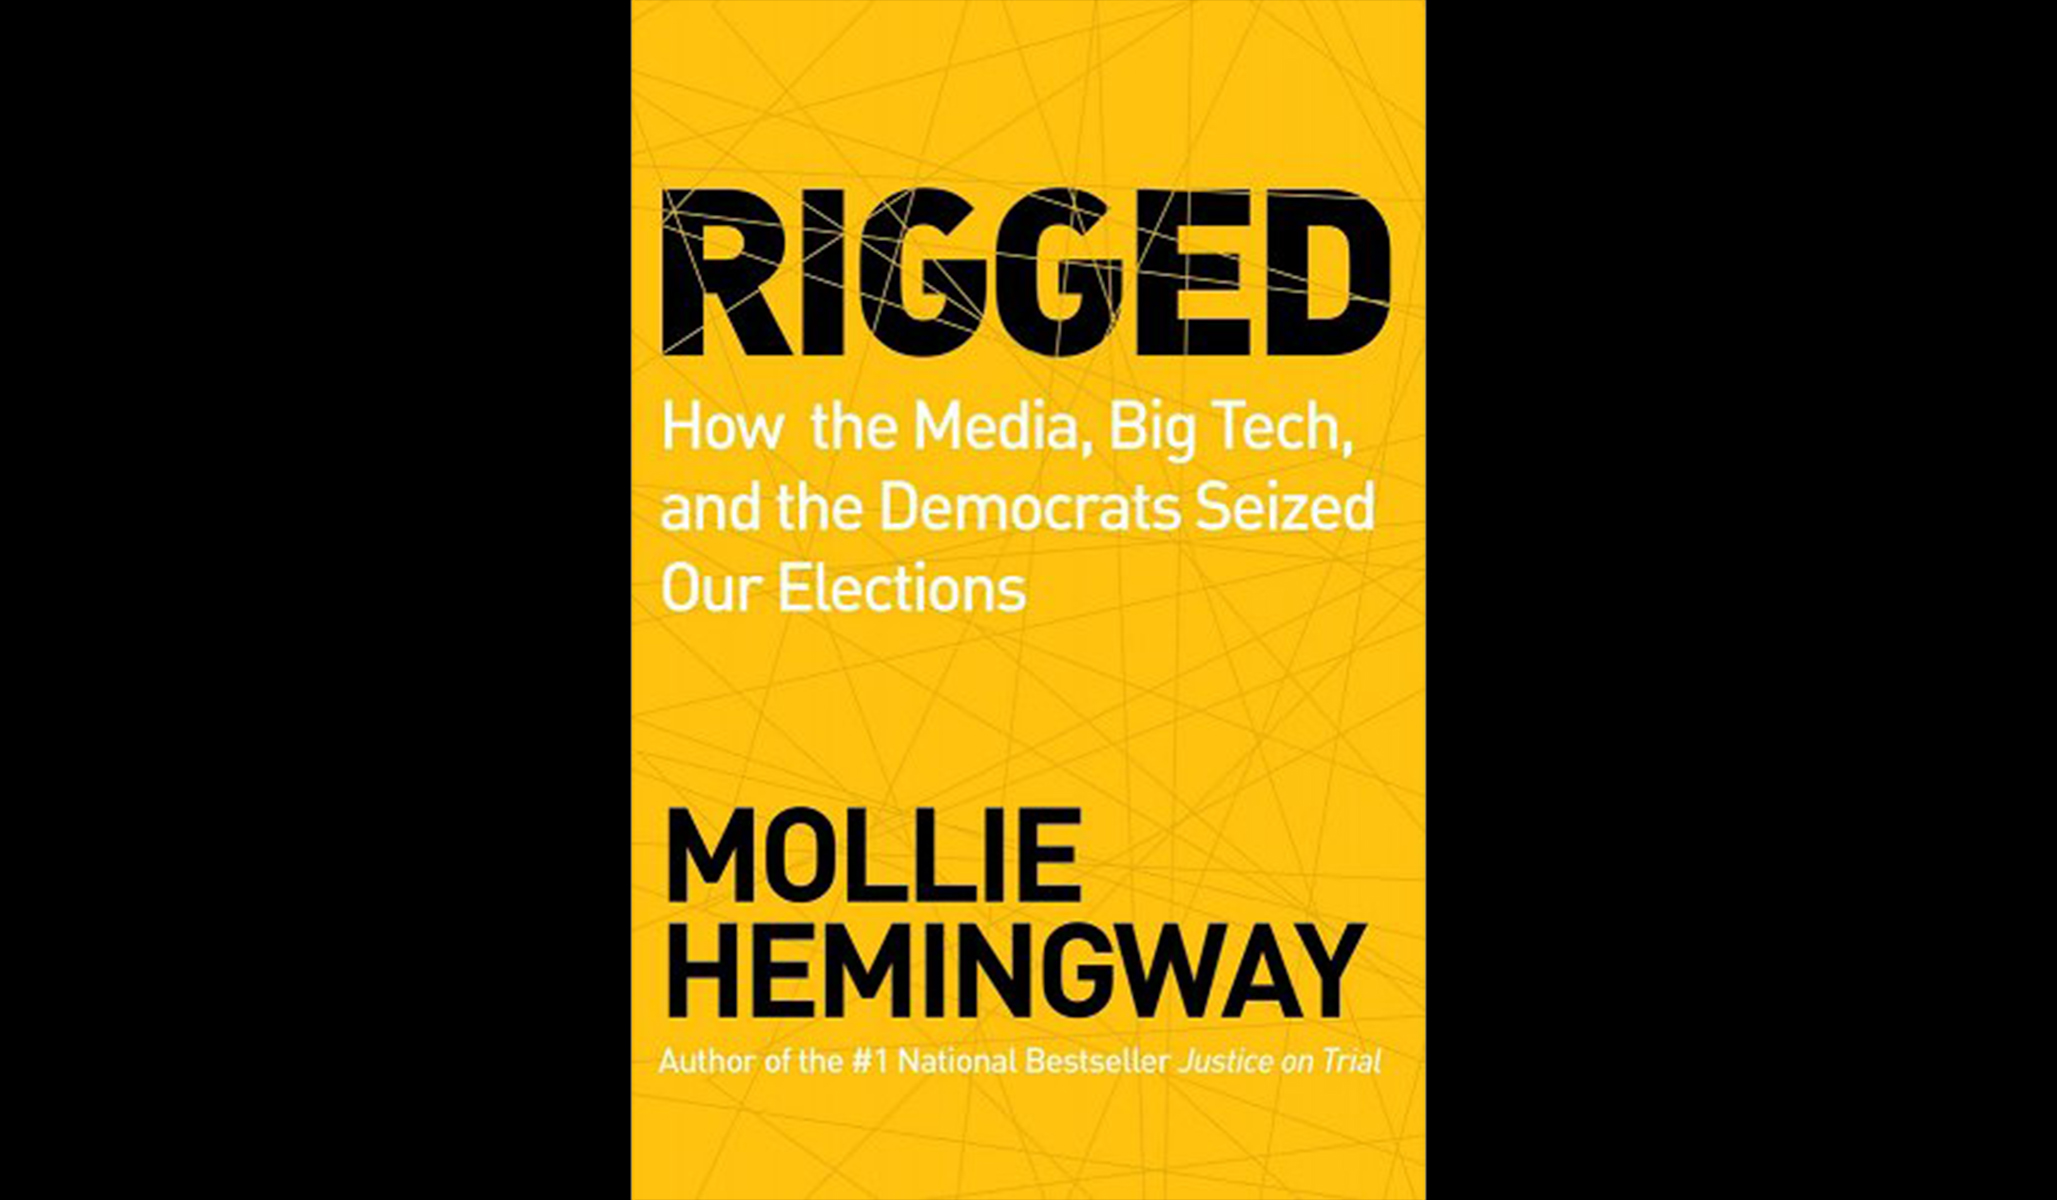 Rigged: How the Media, Big Tech, and the Democrats Seized Our Elections by Mollie Hemingway